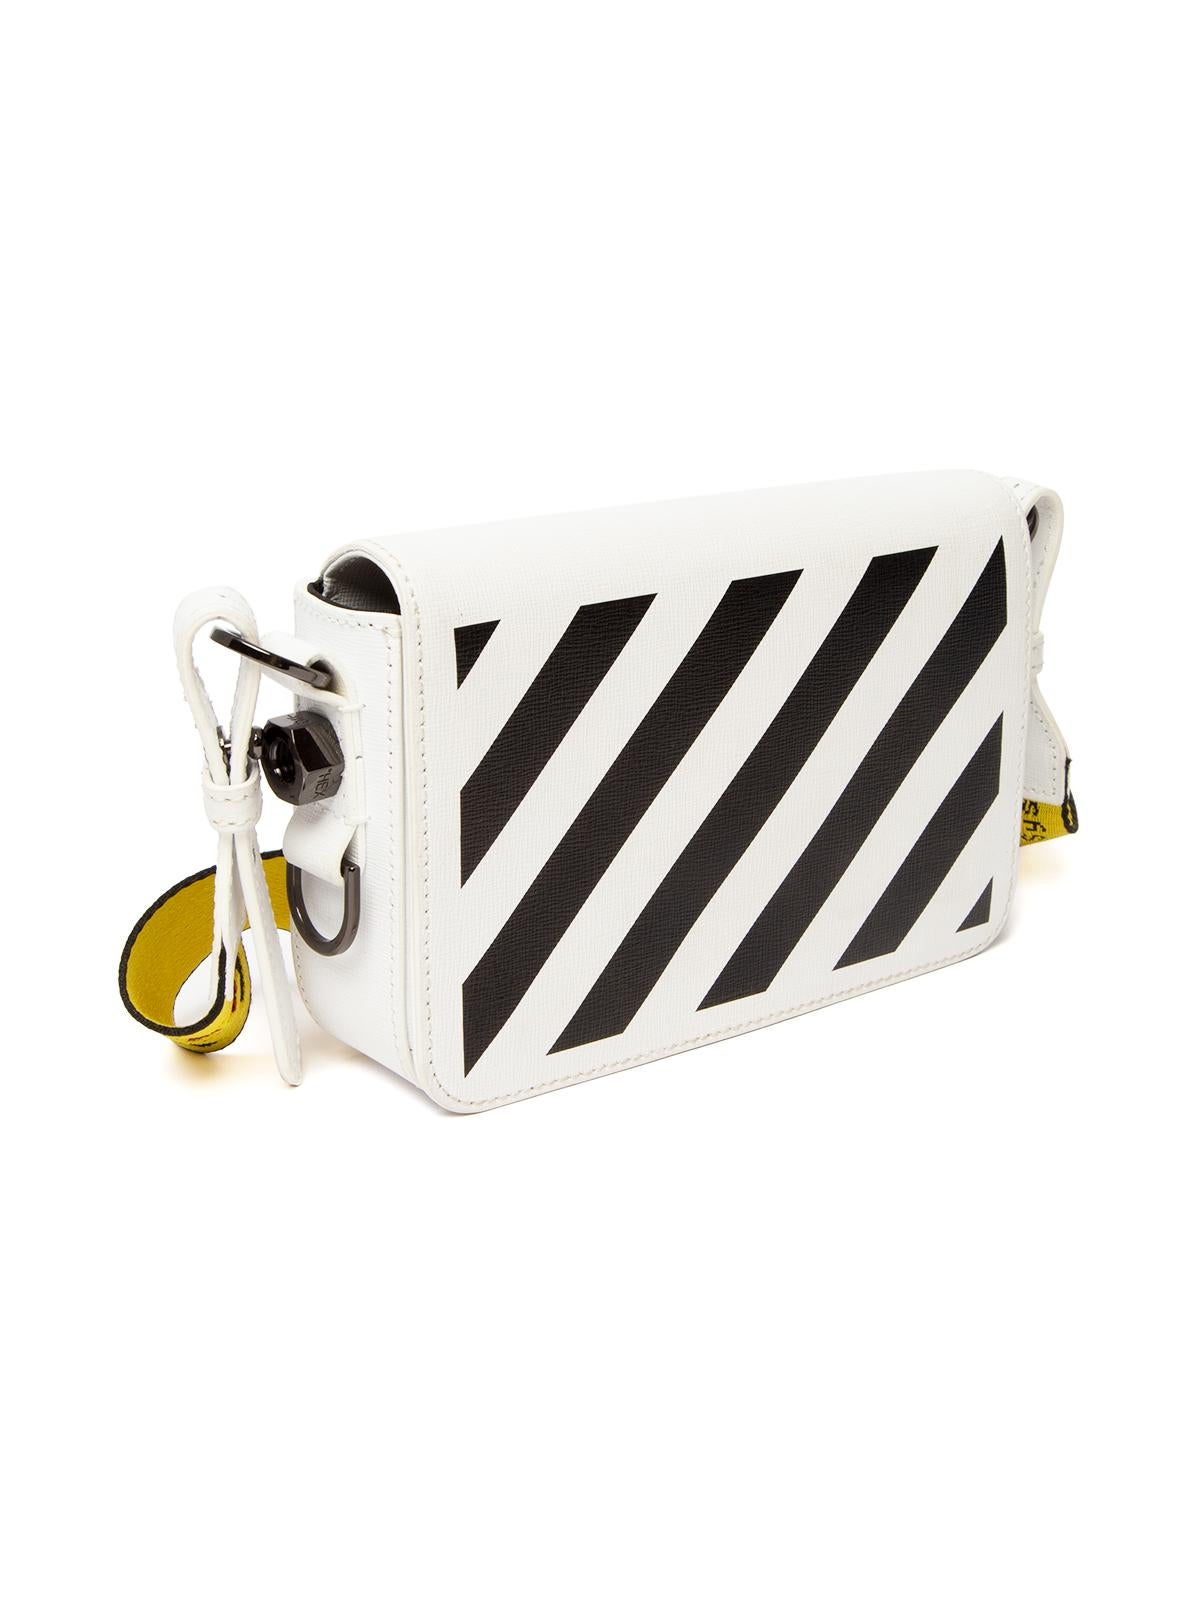 CONDITION is Good. Some wear to bag is evident. Some smudges on the leather at the back of the bag on this used Off White designer resale item. Details White Black and white stripes Leather Crossbody Magnetic close flap 2 x inner compartments Yellow